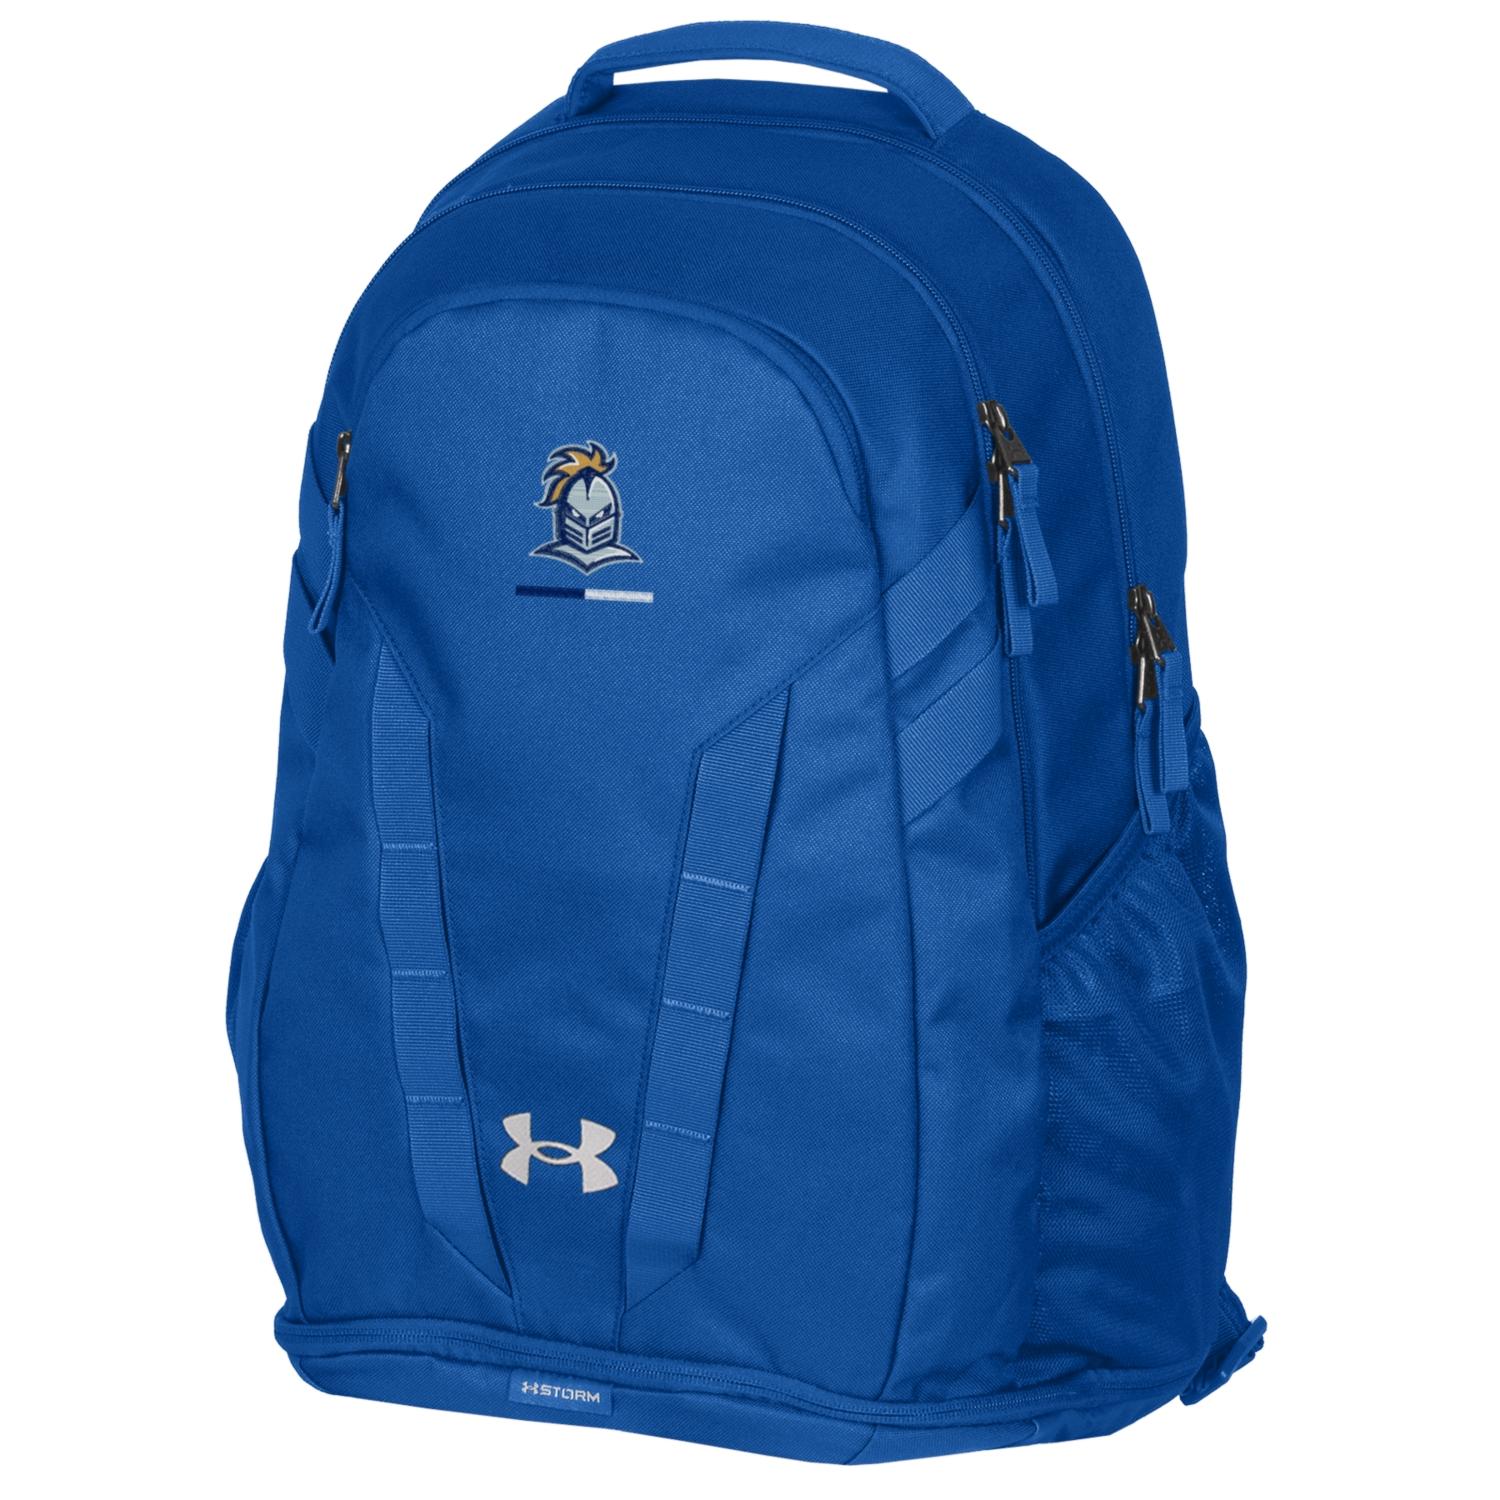 Community College of Baltimore County  Hustle 5.0 Backpack r